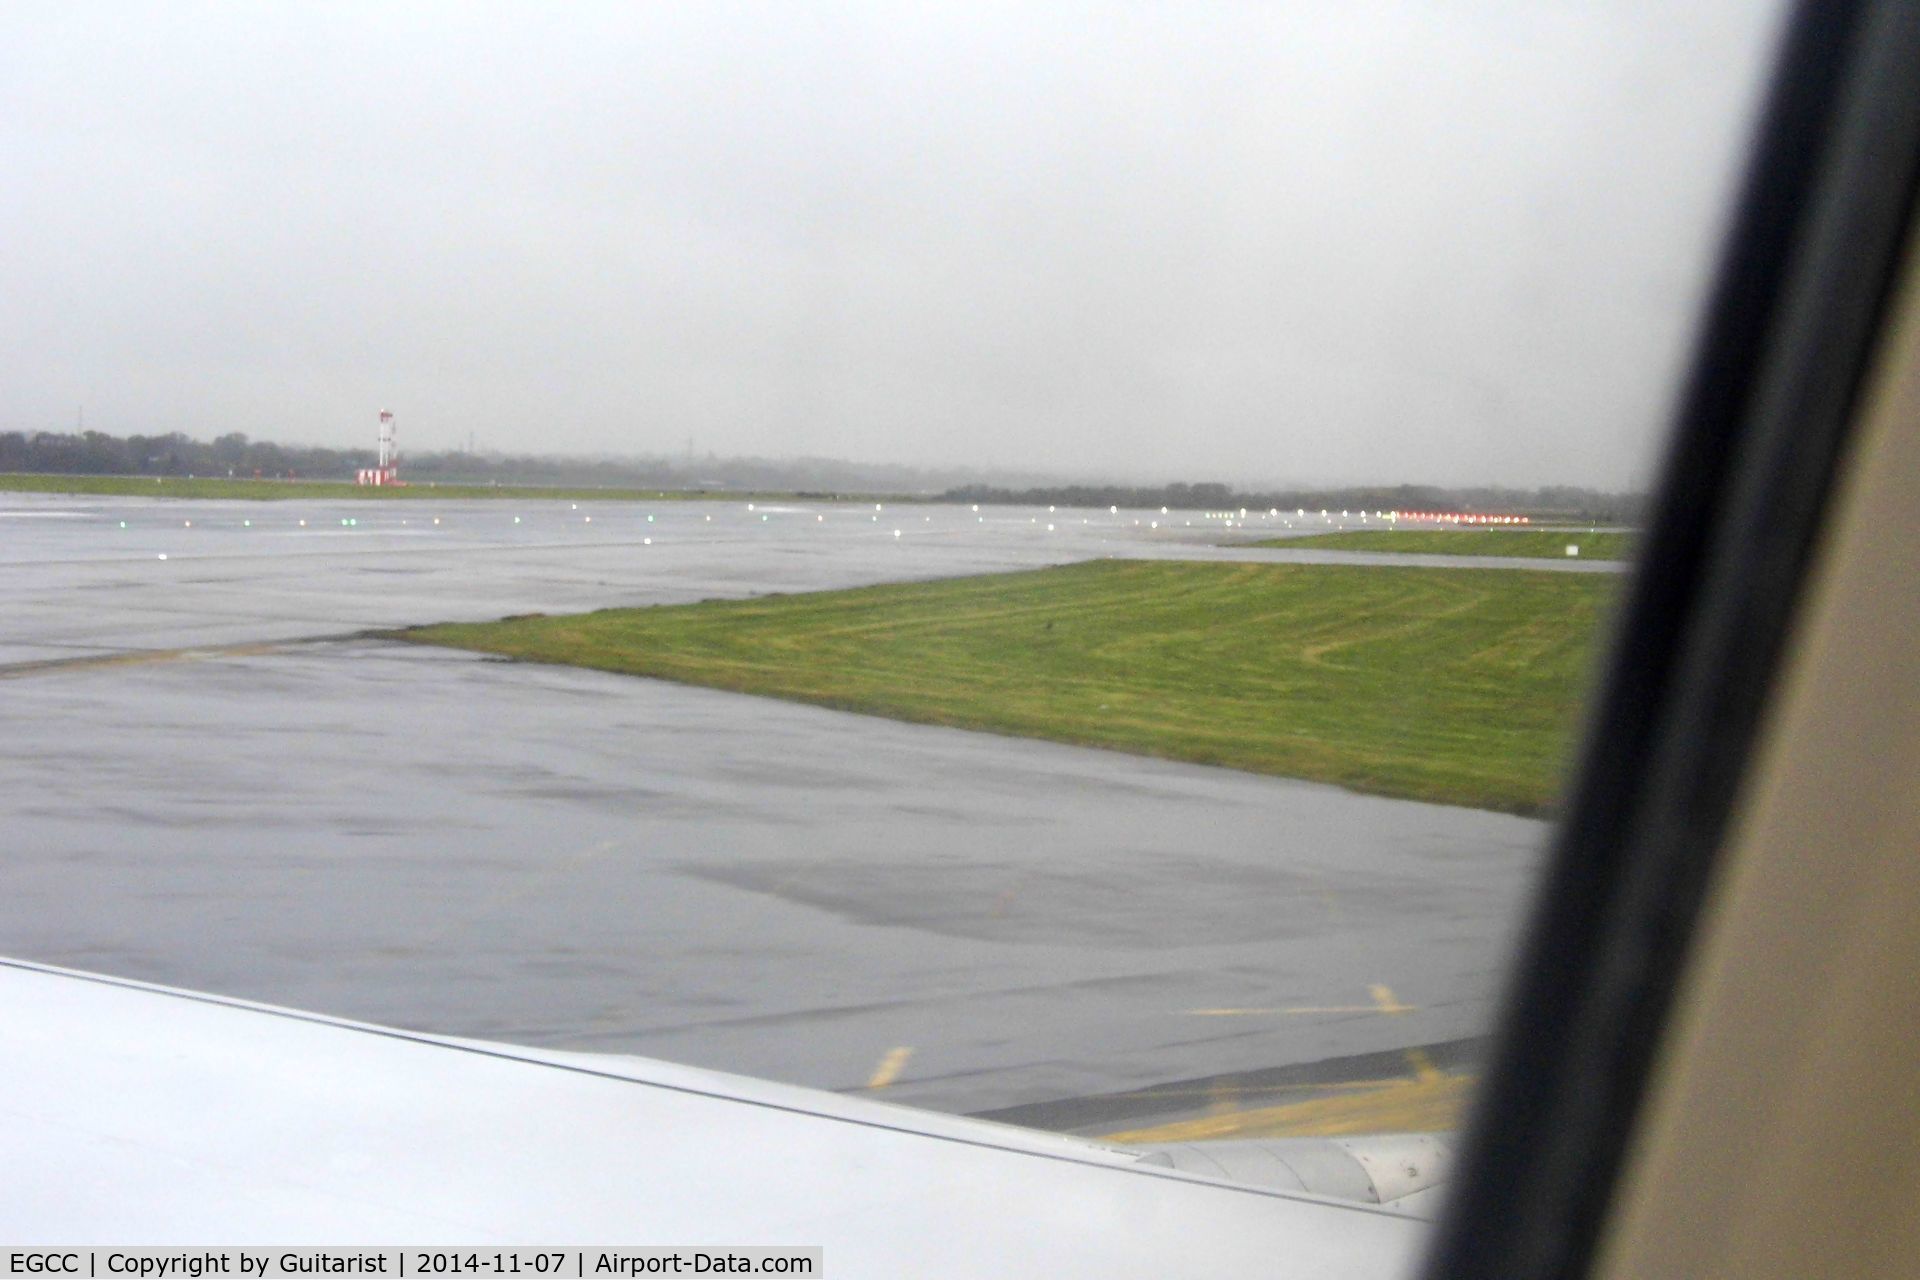 Manchester Airport, Manchester, England United Kingdom (EGCC) - A wet arrival back into MAN